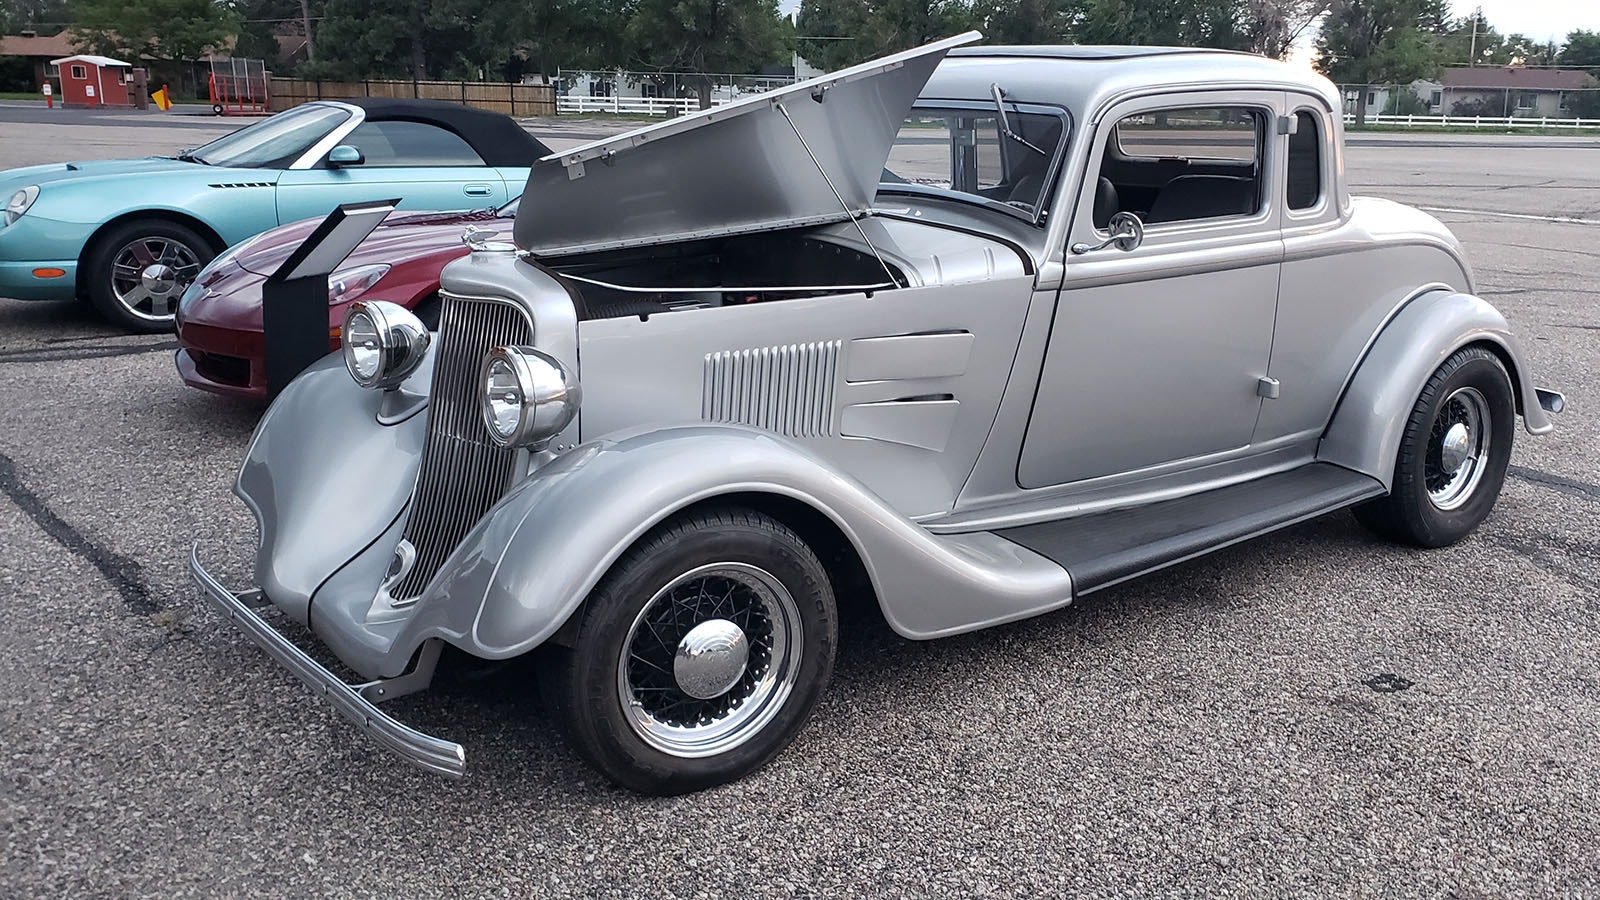 A 1934 Plymouth coupe on display at Cars Guitars and Cigars.